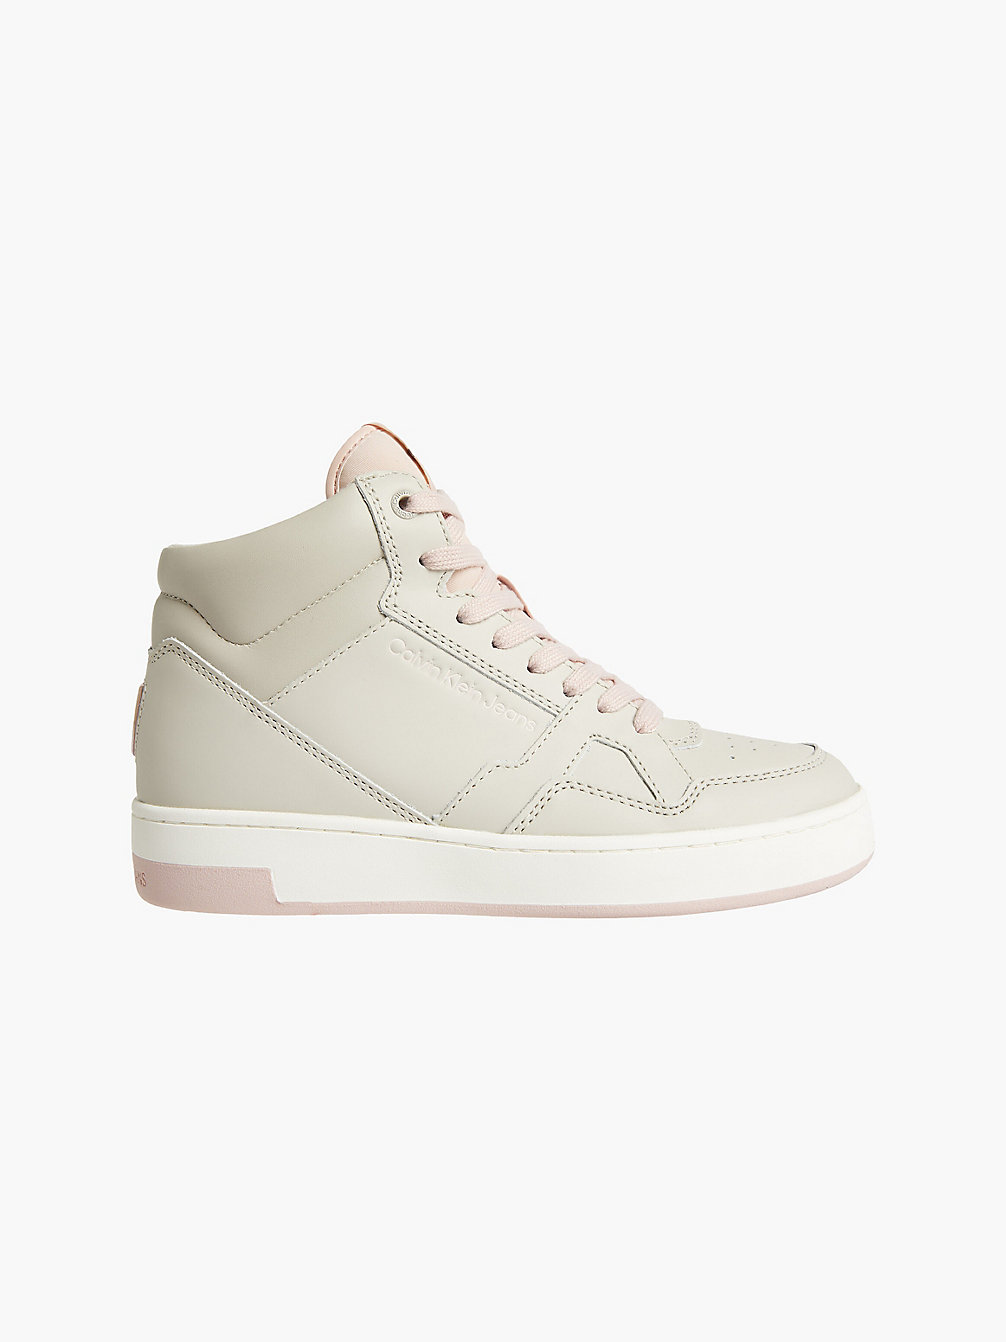 EGGSHELL/PINK BLUSH Leather High-Top Trainers undefined women Calvin Klein